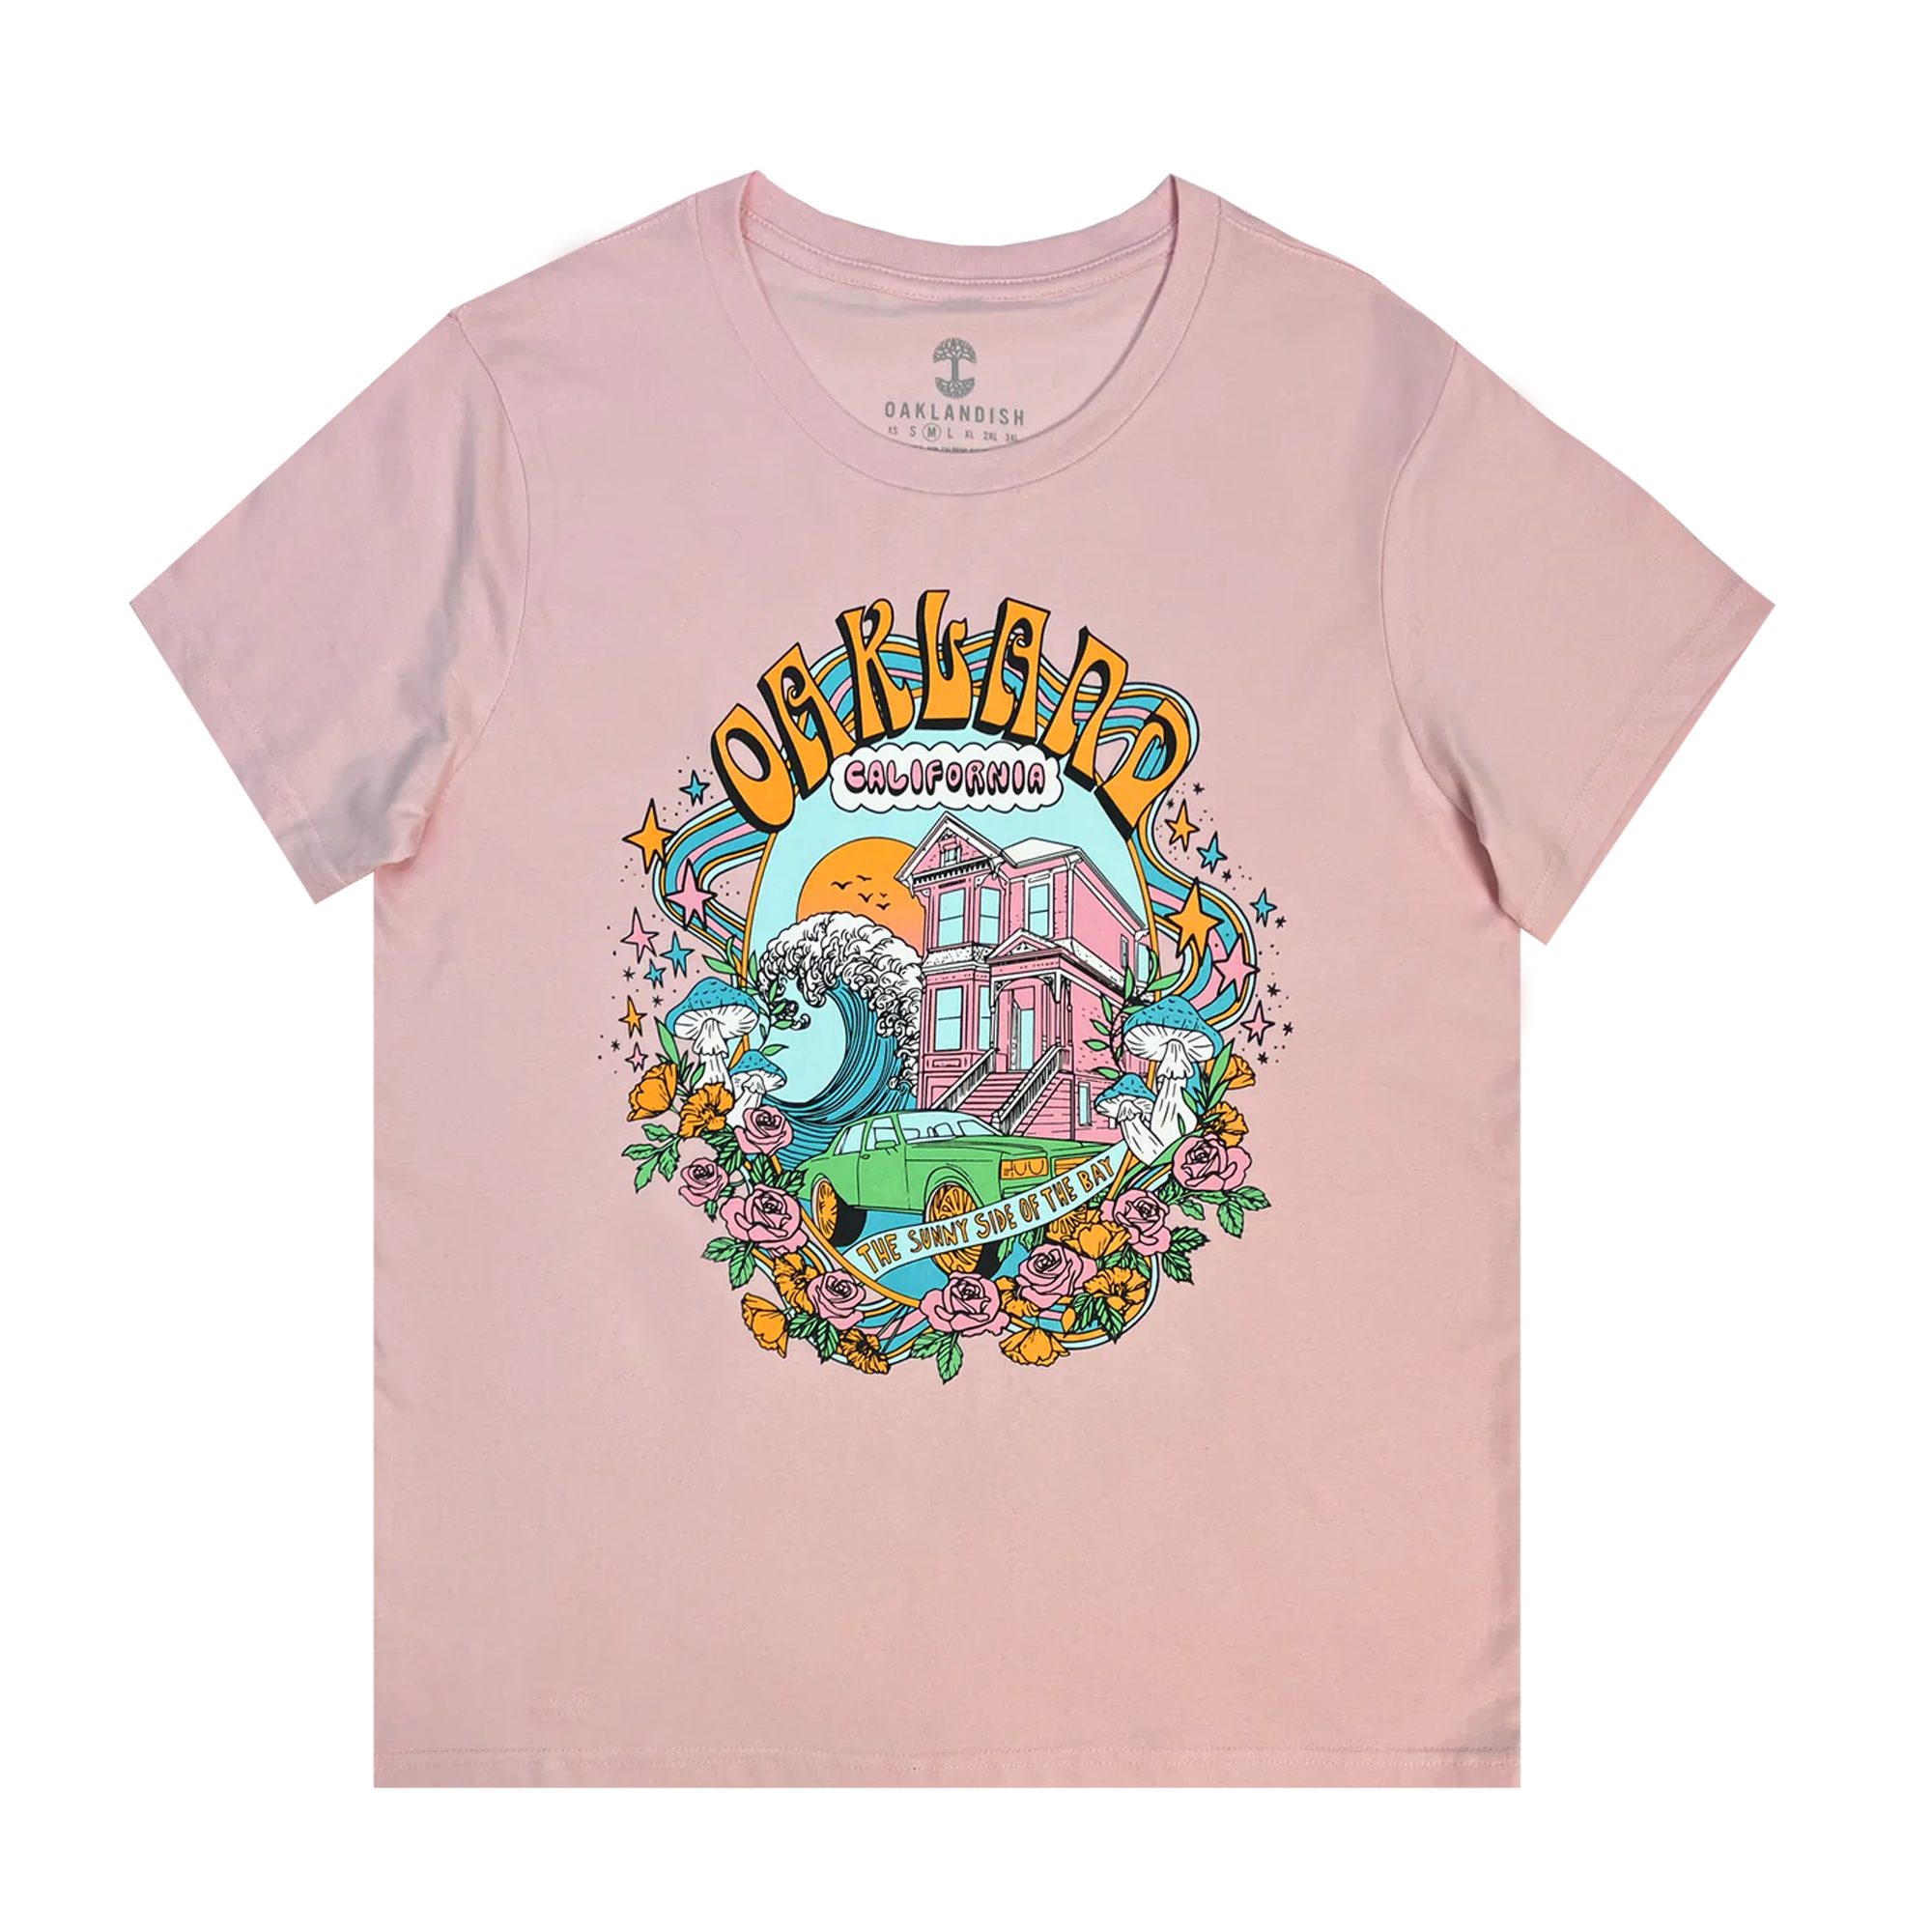 Pink t-shirt with Oakland Dream multi-color graphic on the front chest.